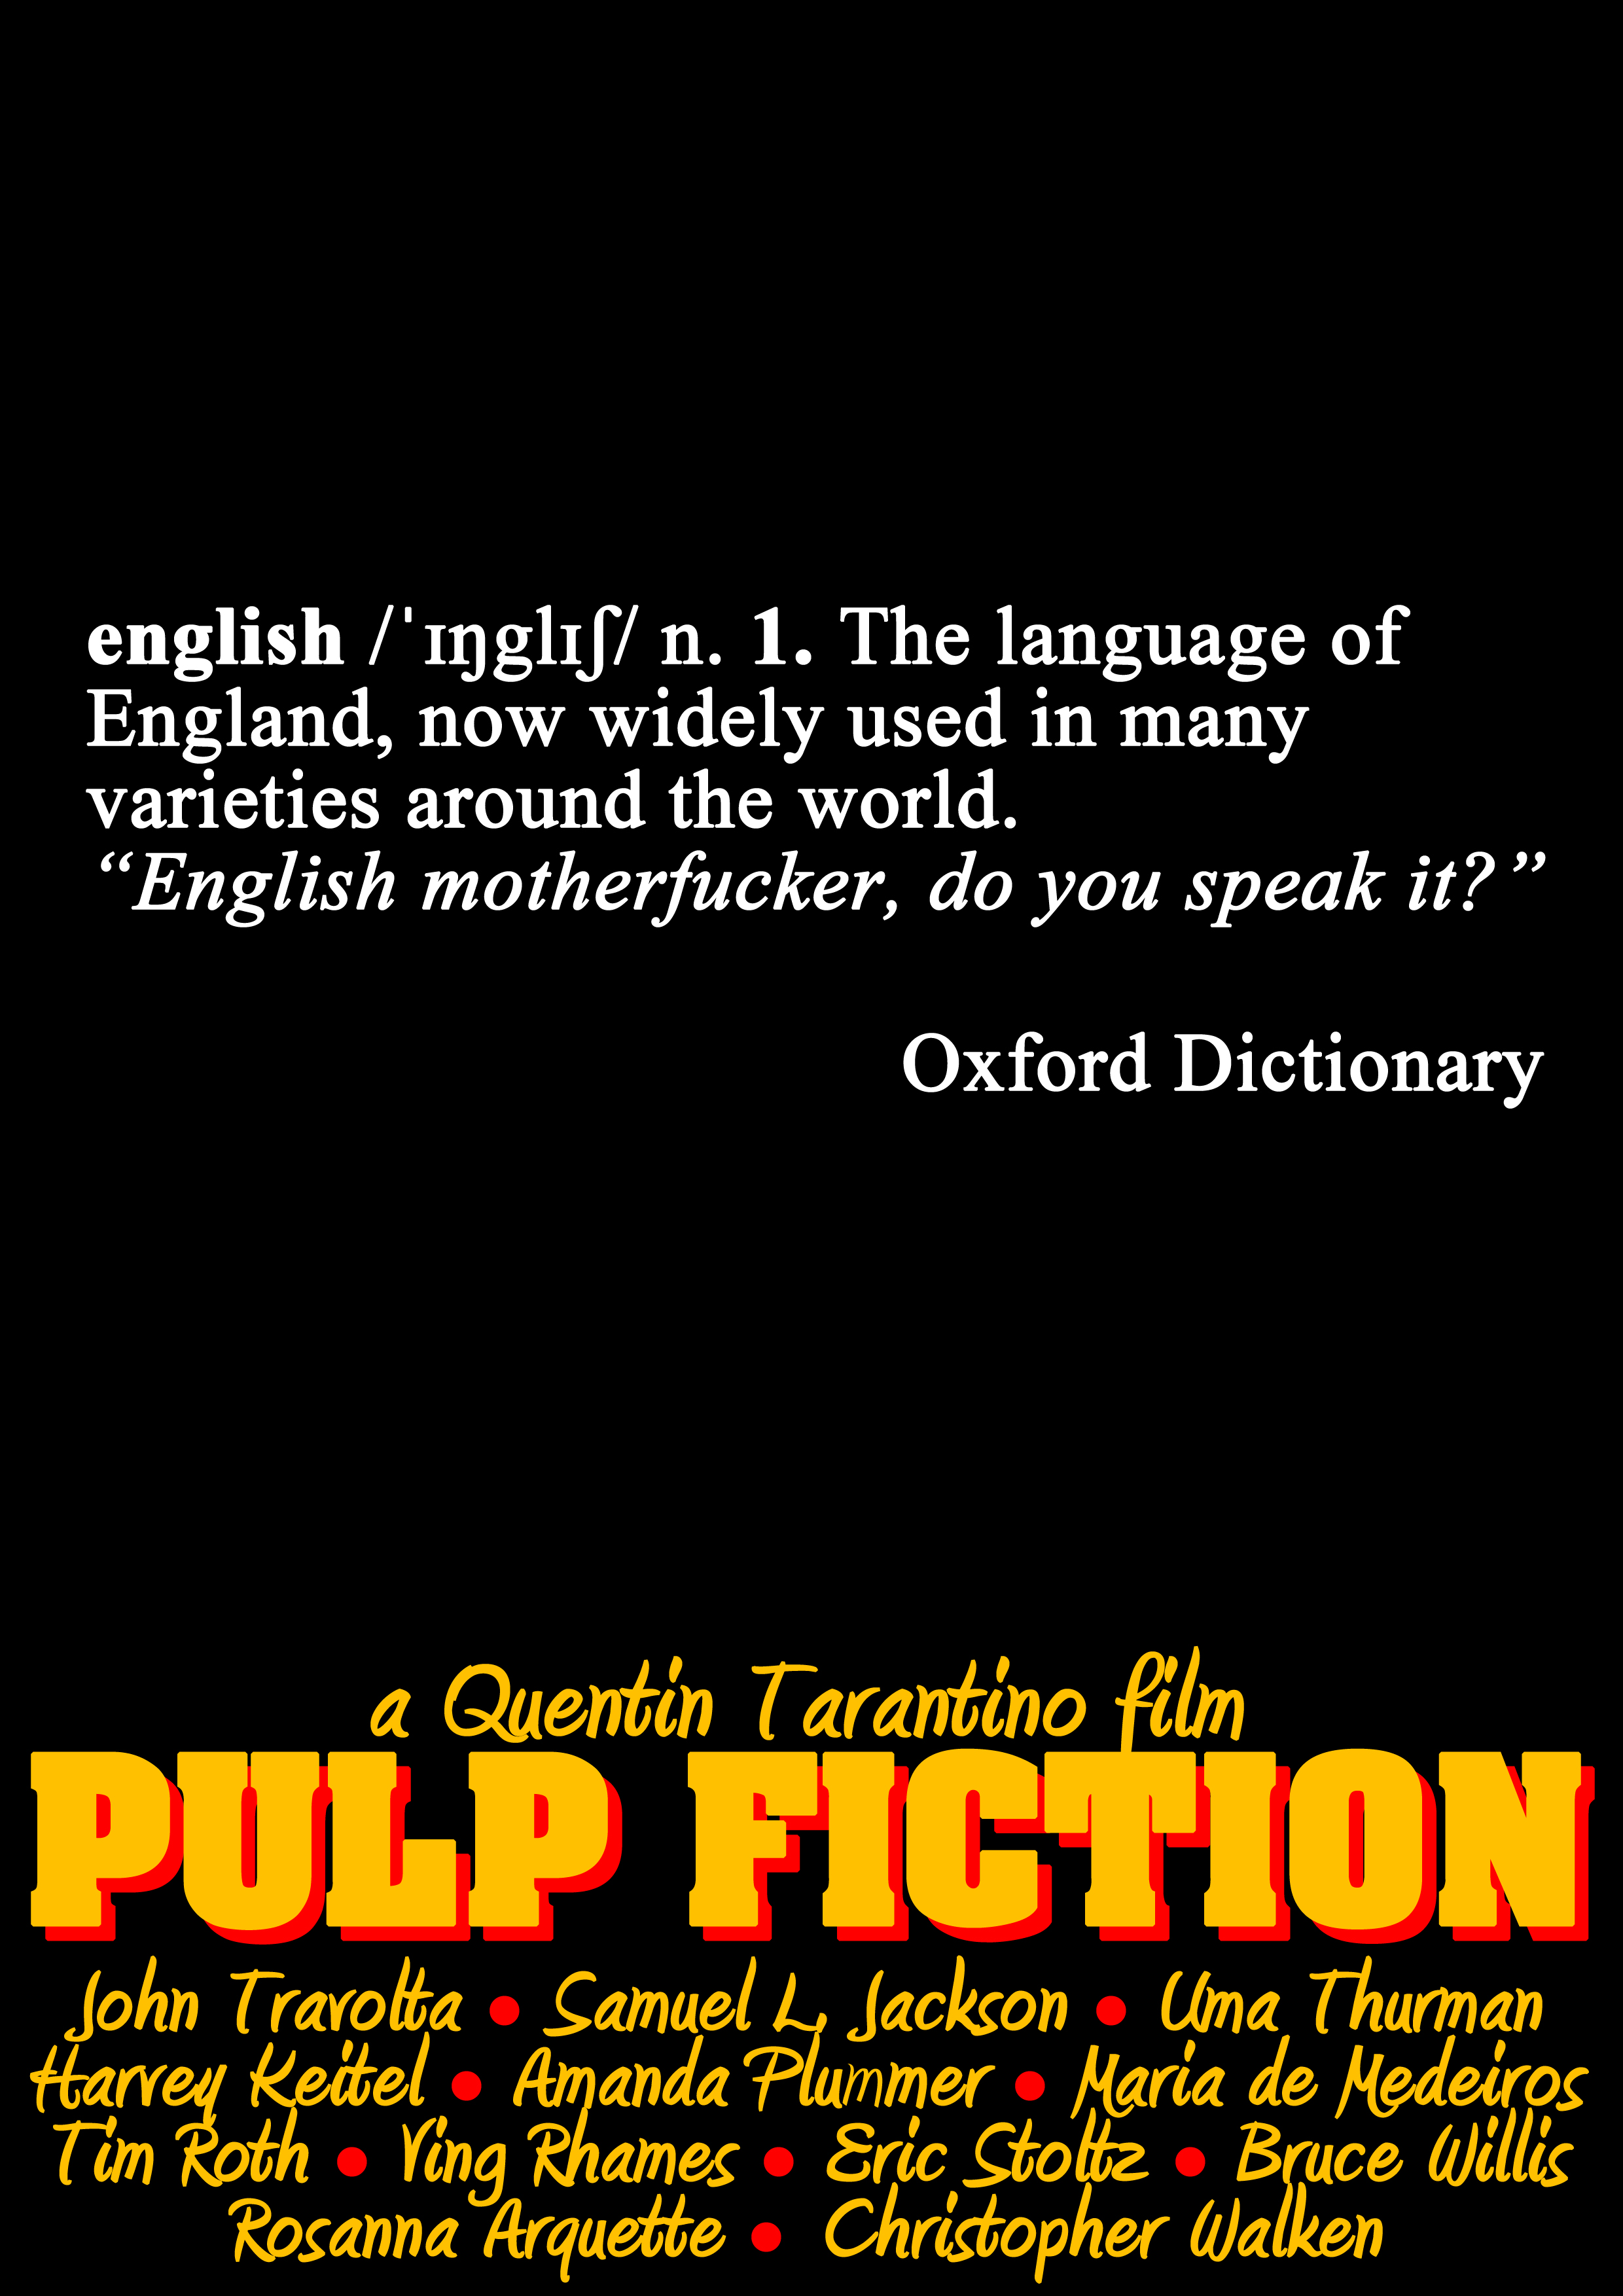 Awesome Pulp Fiction Quotes. QuotesGram